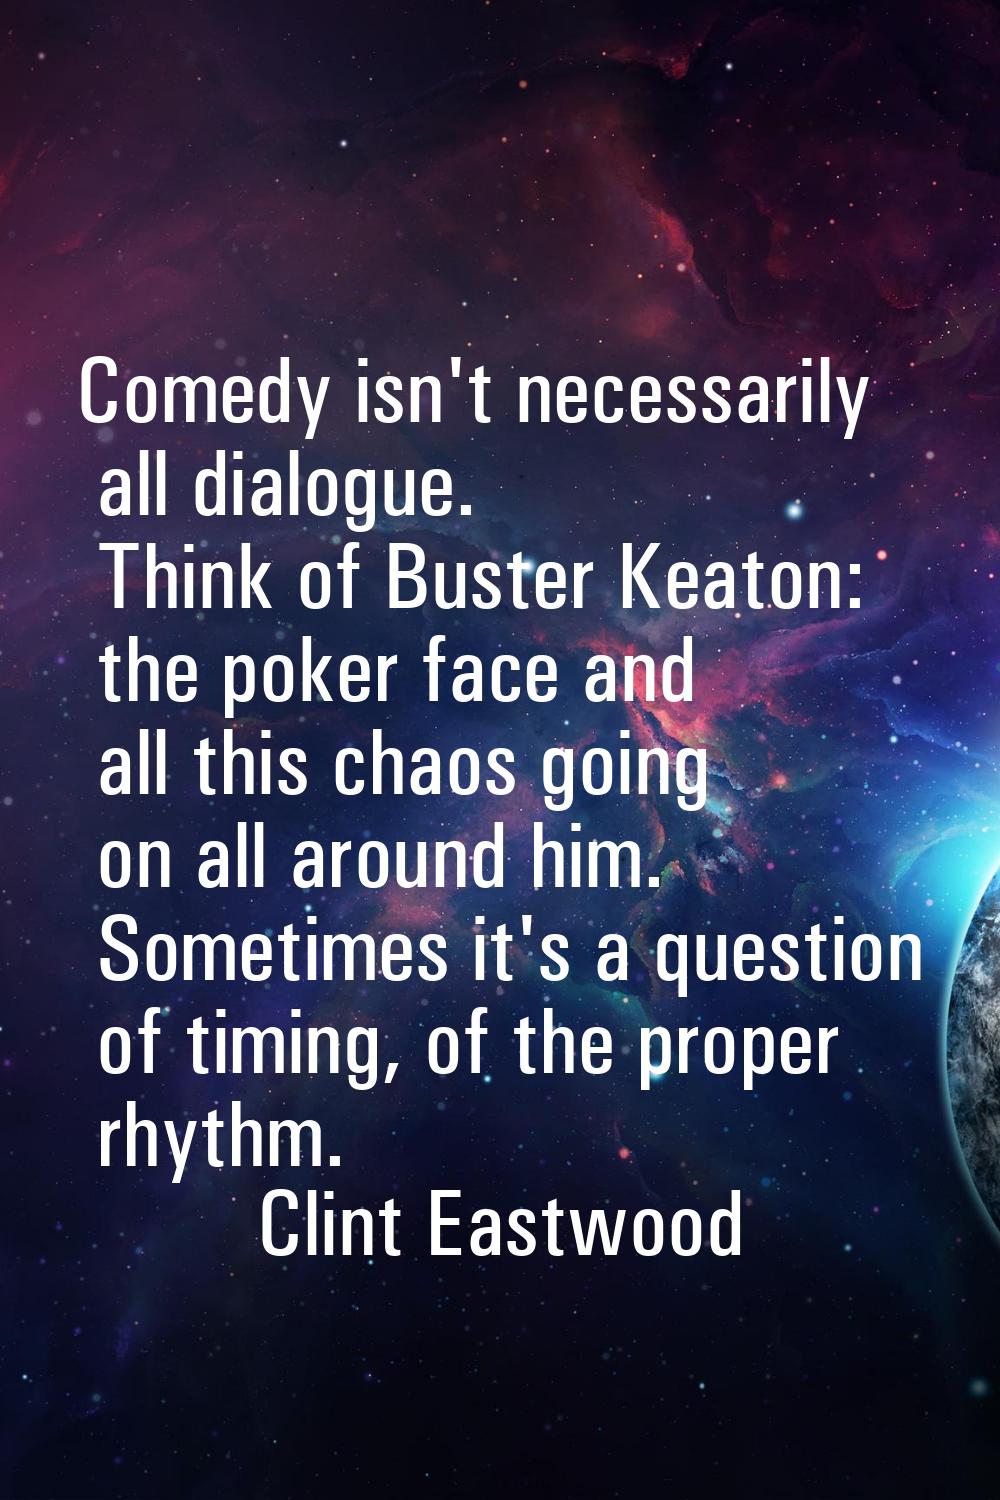 Comedy isn't necessarily all dialogue. Think of Buster Keaton: the poker face and all this chaos go